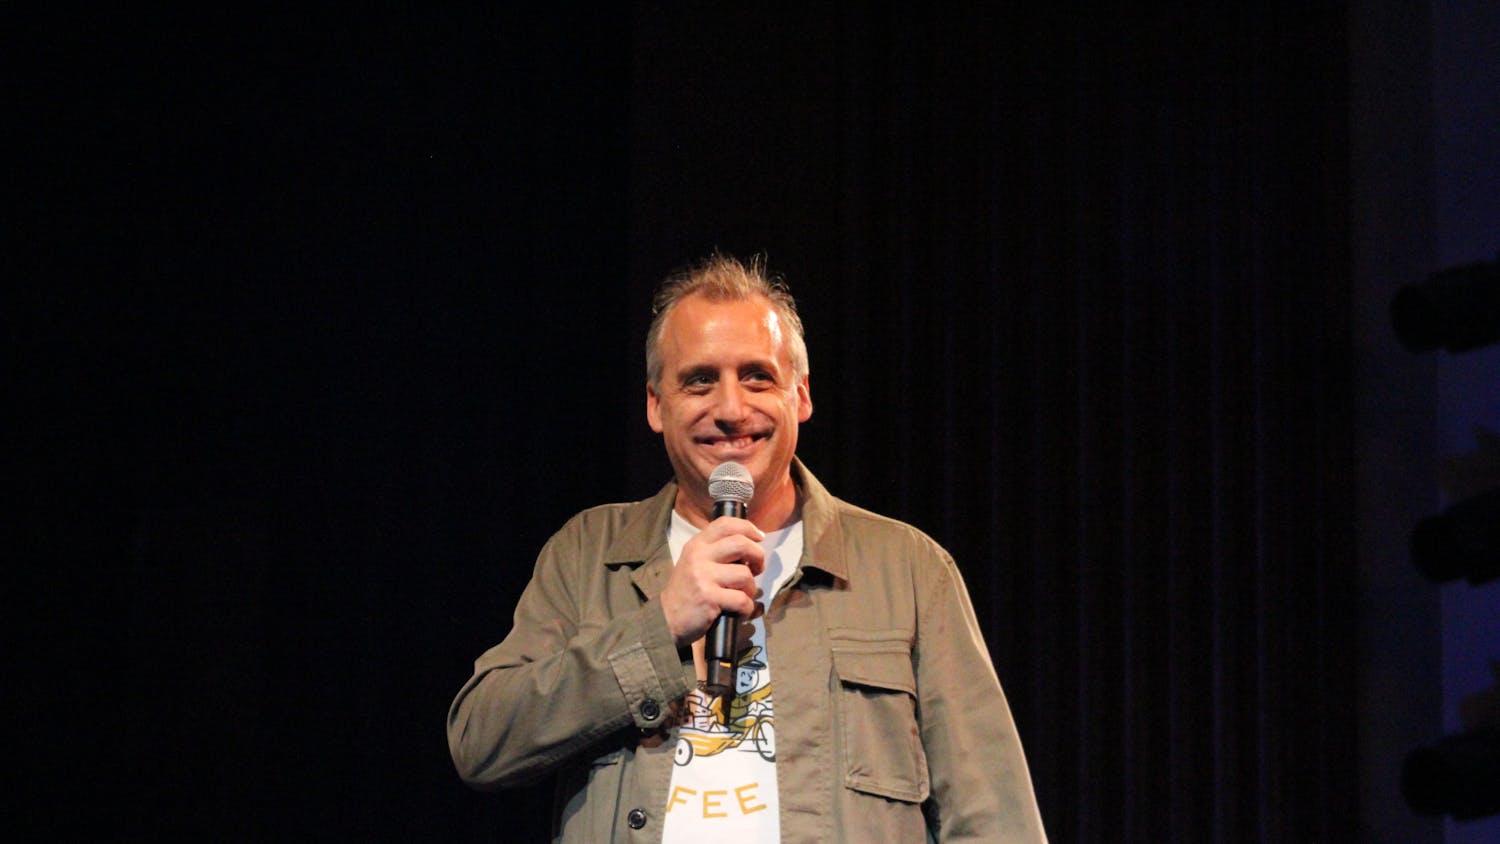 Gatto’s comedy show consisted of many retellings of funny memories shared with his co-stars from “Impractical Jokers” (Photo by Elizabeth Gladstone / Multimedia Coordinator).